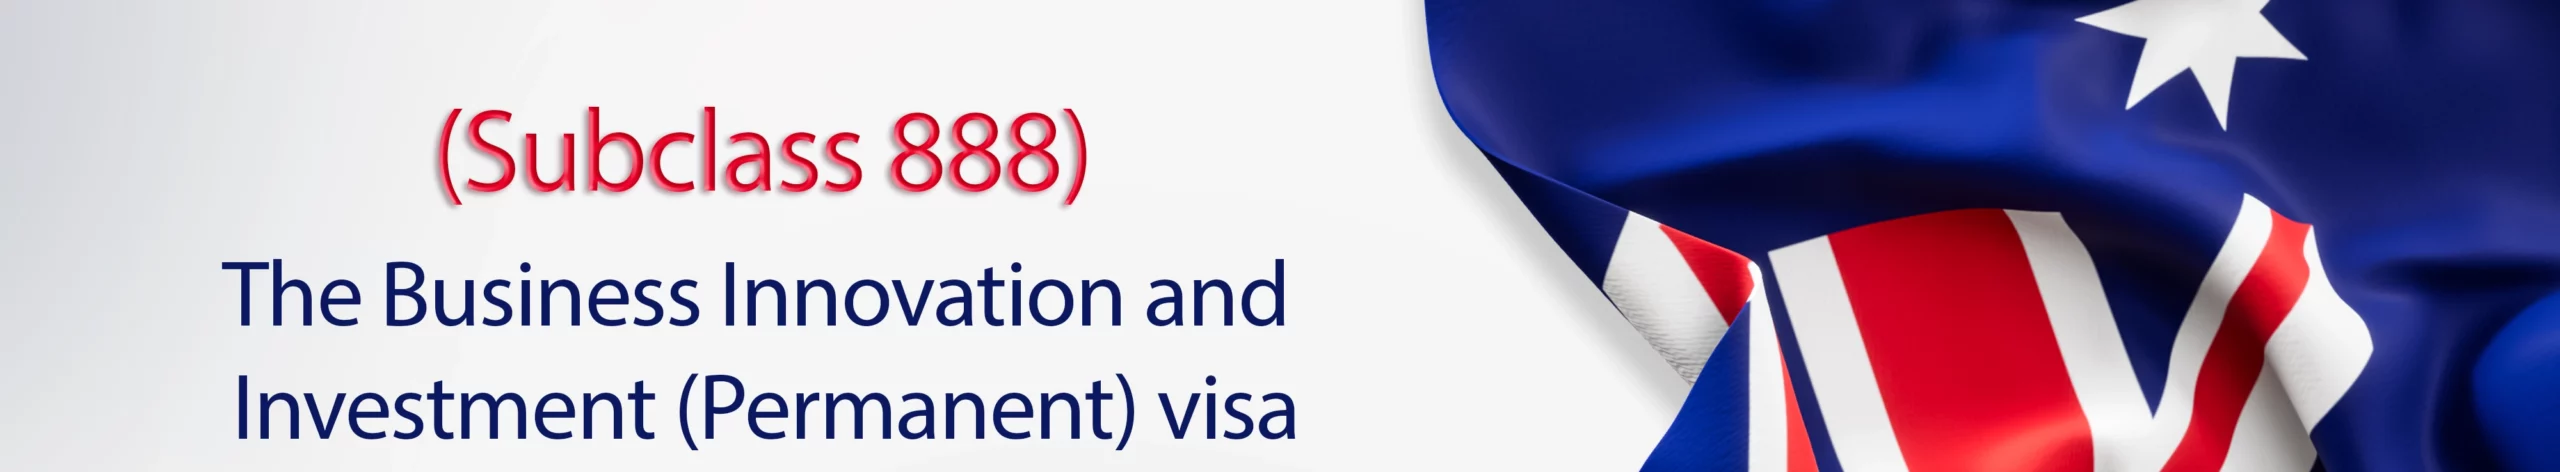 The Business Innovation and Investment (Permanent) visa (subclass 888) banner